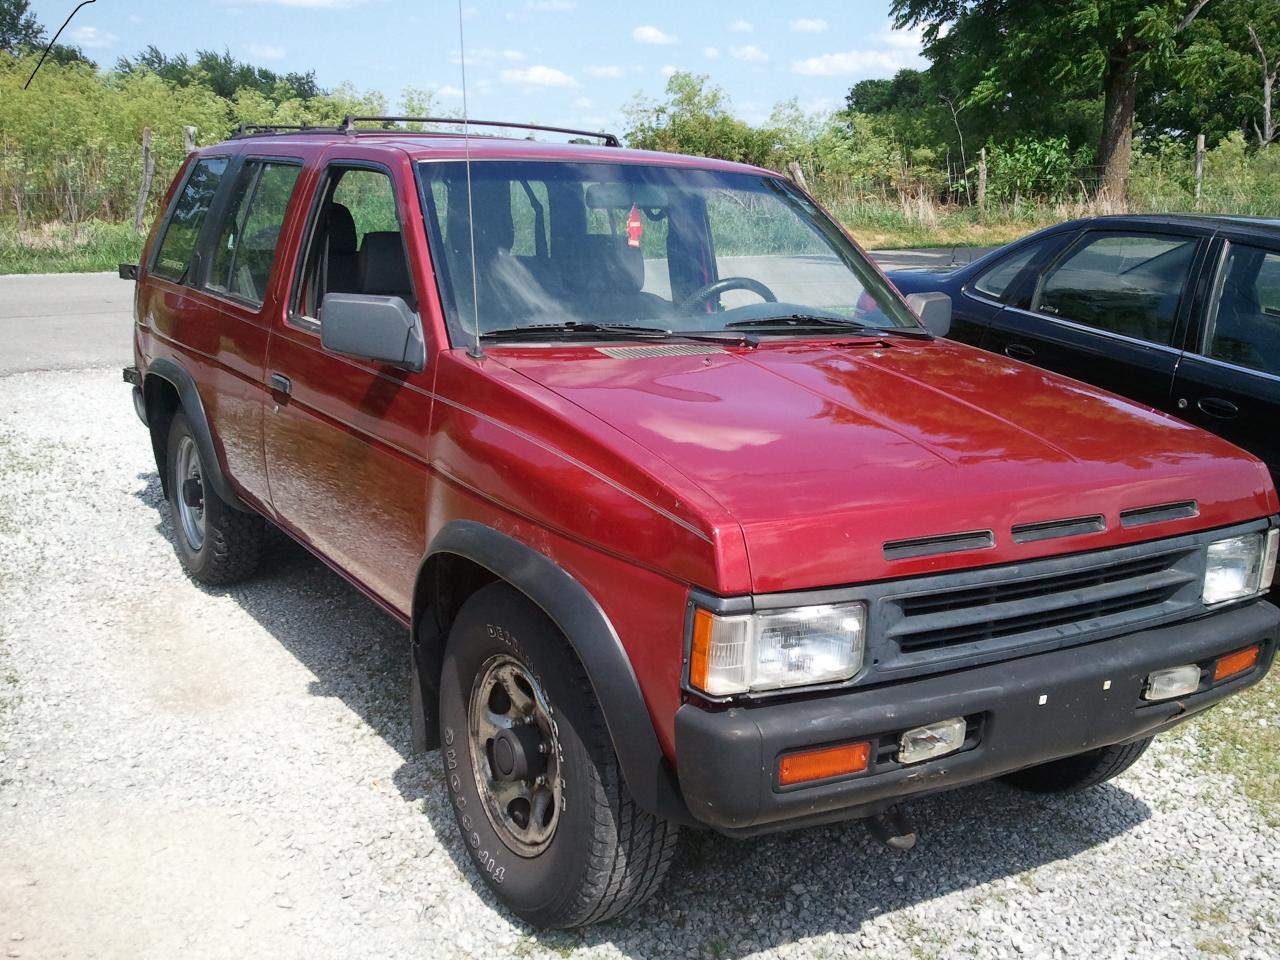 This is the 1995 Nissan